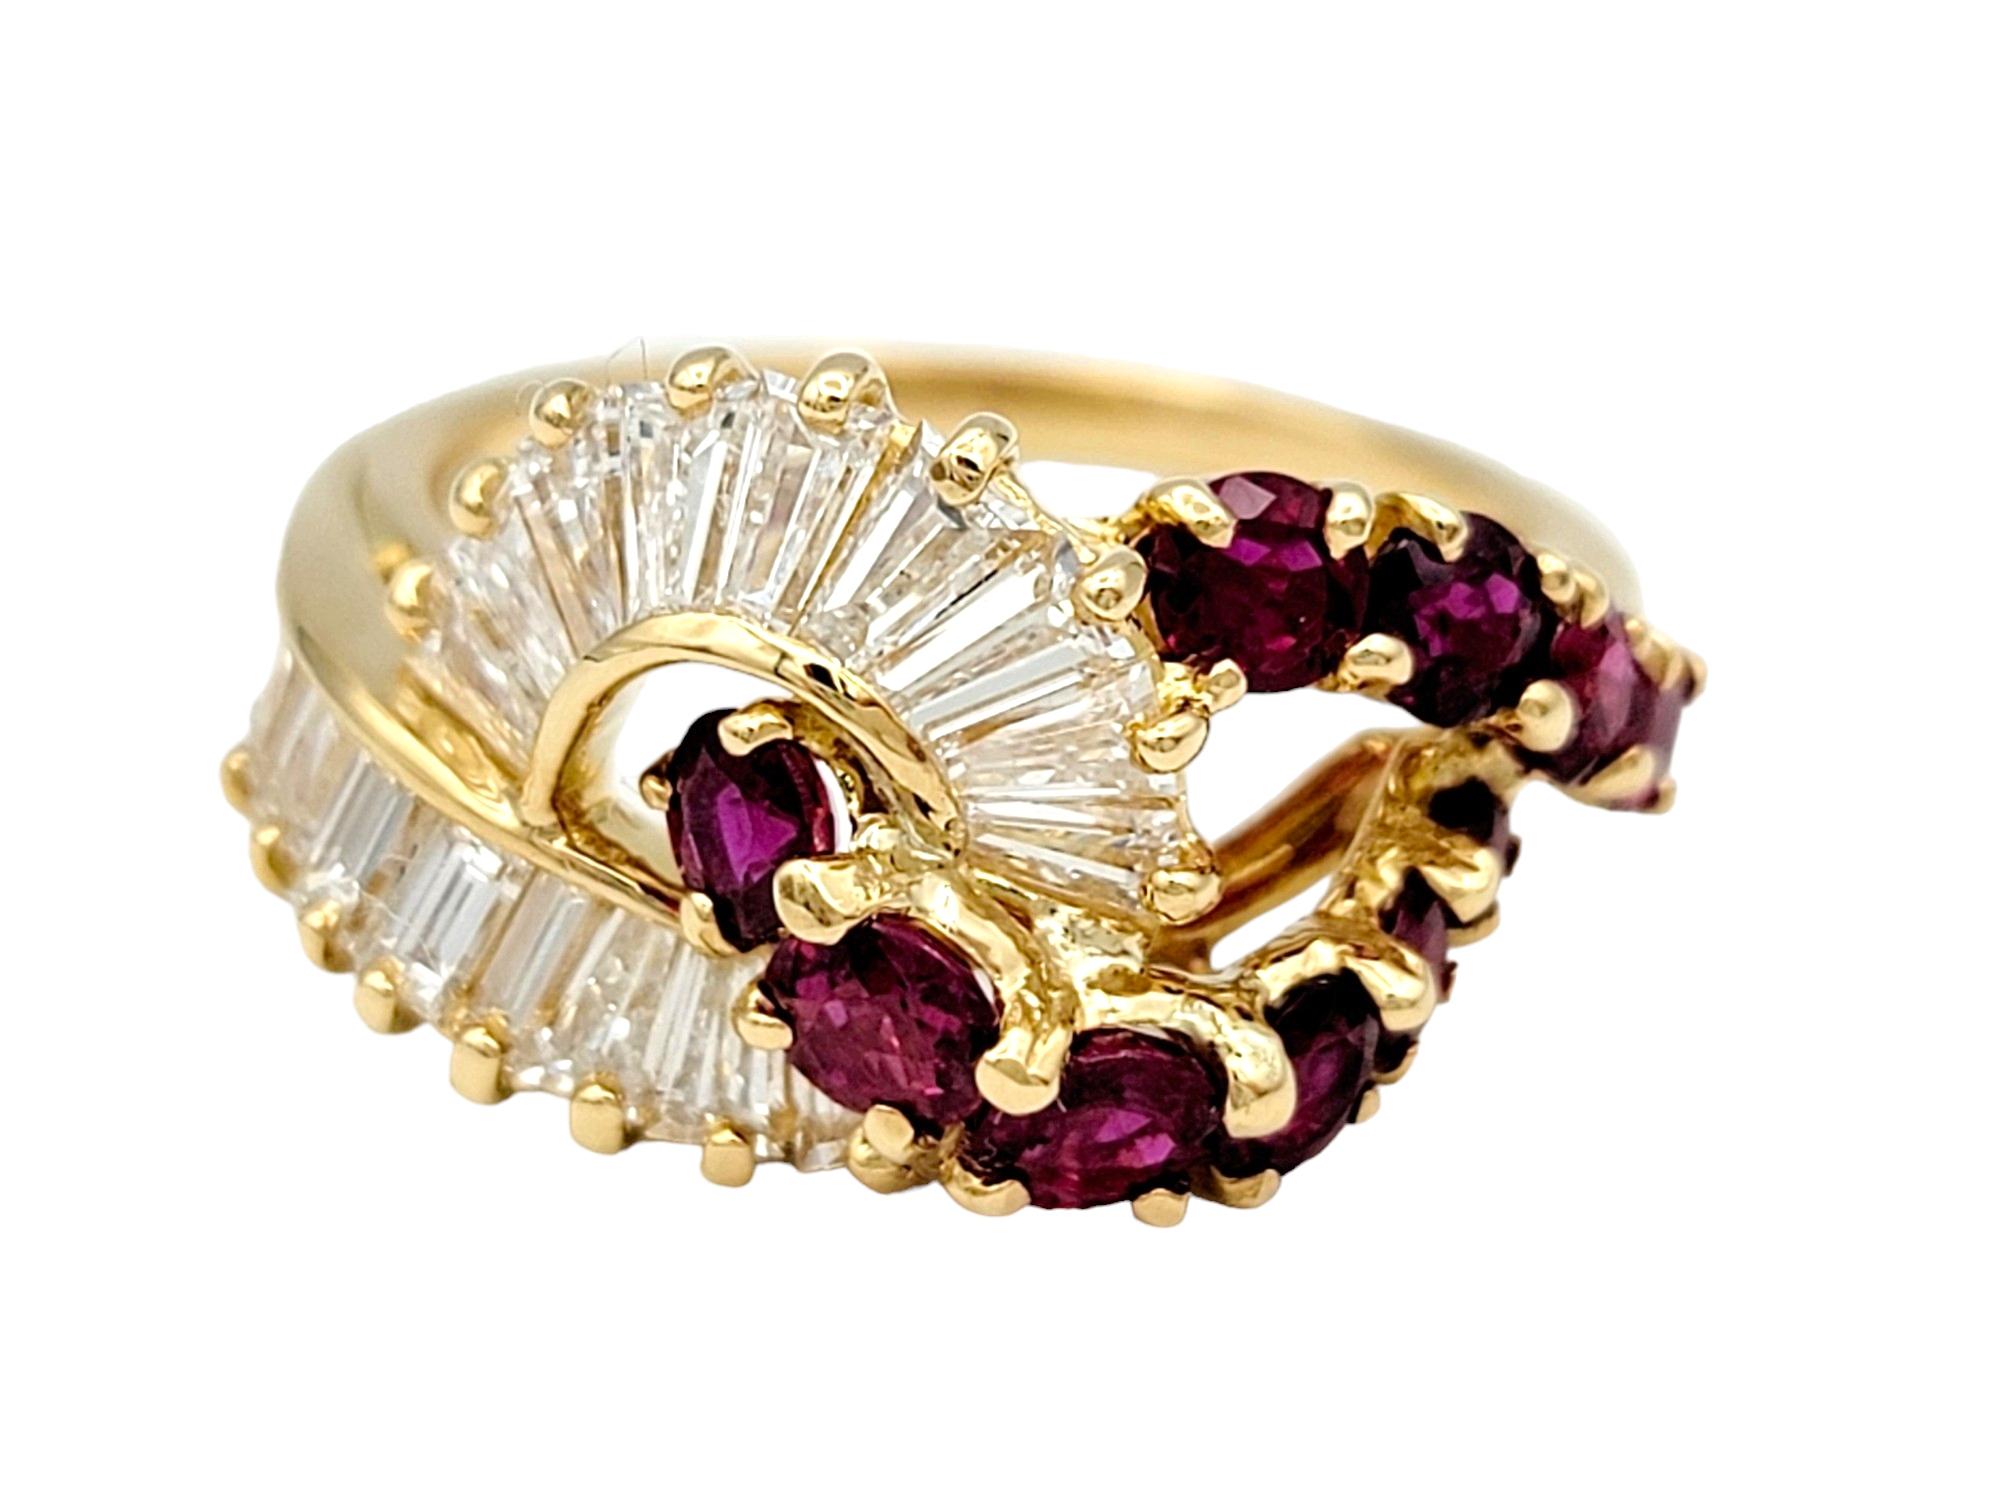 Ring Size: 7

This Hammerman Brothers diamond and ruby band ring, set in luxurious 18 karat yellow gold, is a striking and sophisticated piece of jewelry. The ring features alternating baguette-cut diamonds and round-cut rubies, meticulously set in